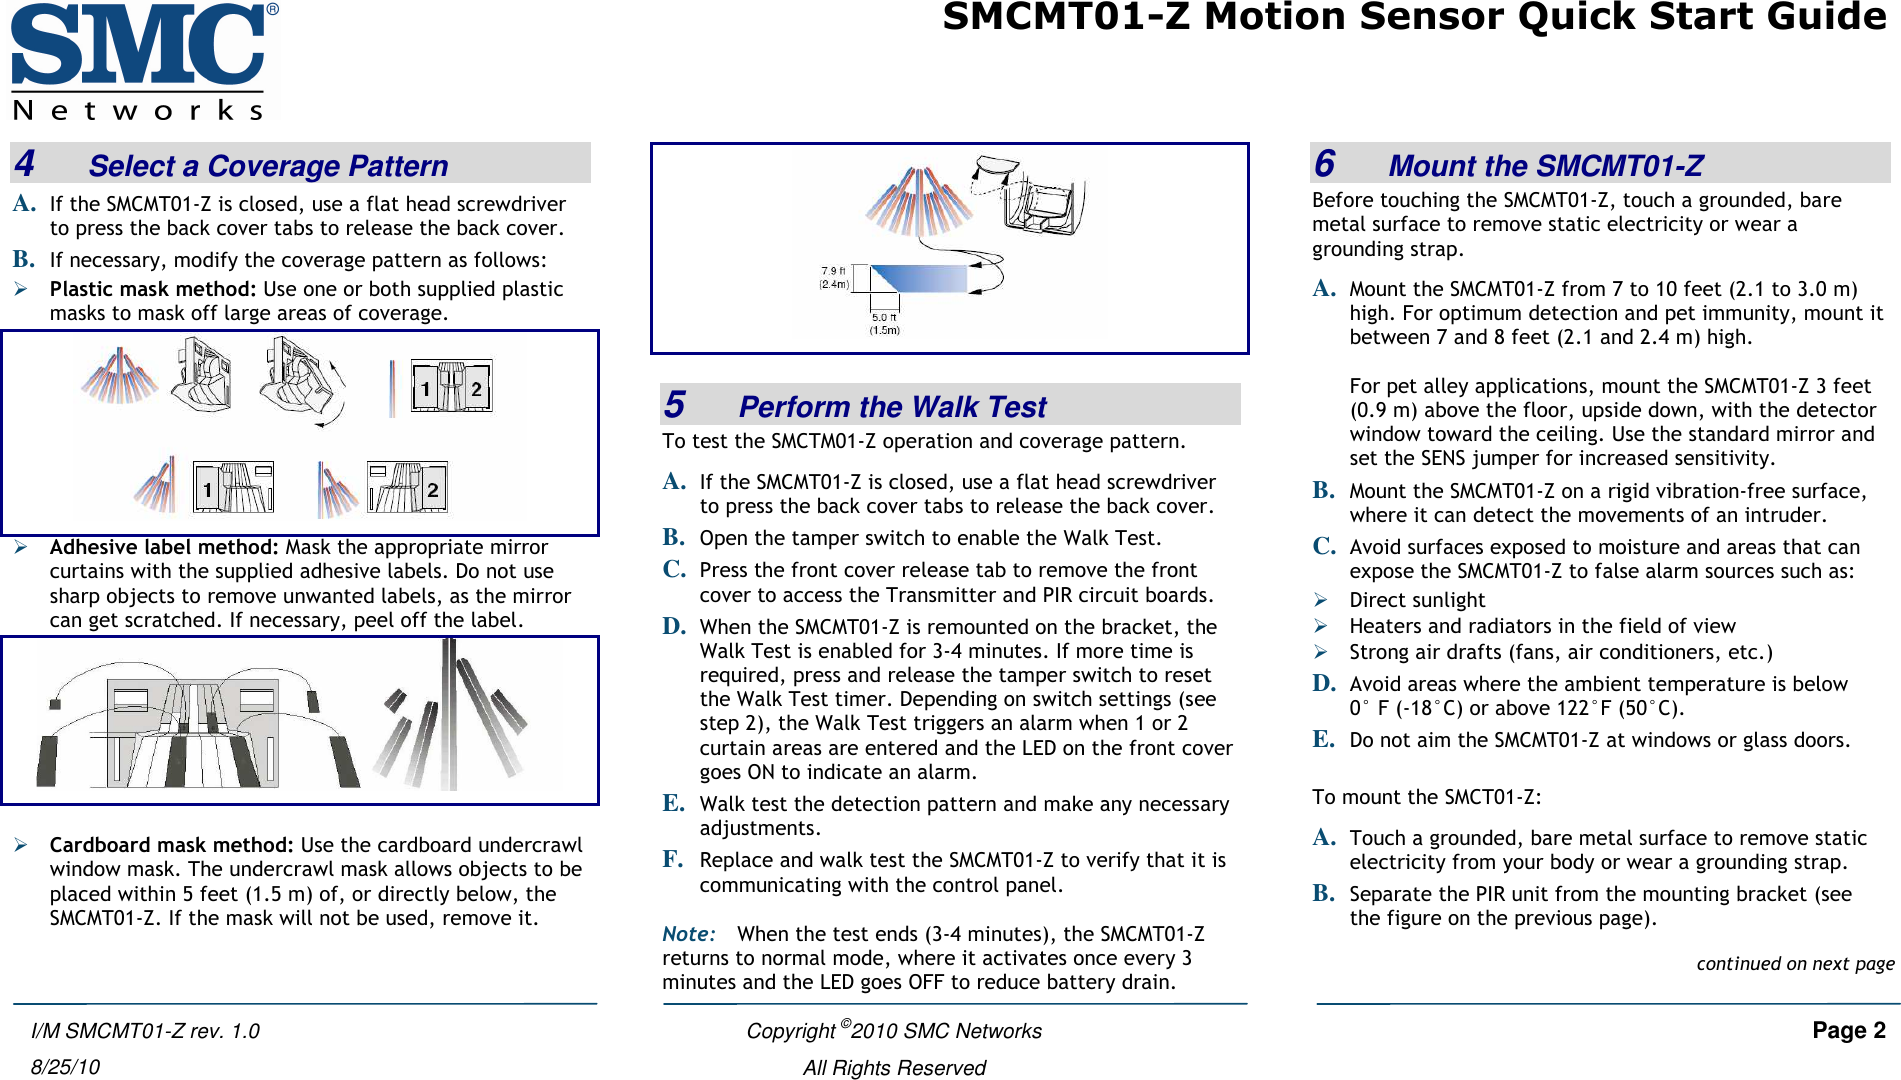 SMCMT01-Z Motion Sensor Quick Start Guide   Copyright ©2010 SMC Networks     Page 2  All Rights Reserved  I/M SMCMT01-Z rev. 1.0 8/25/10 4   Select a Coverage Pattern A. If the SMCMT01-Z is closed, use a flat head screwdriver to press the back cover tabs to release the back cover. B. If necessary, modify the coverage pattern as follows:  Plastic mask method: Use one or both supplied plastic masks to mask off large areas of coverage.   Adhesive label method: Mask the appropriate mirror curtains with the supplied adhesive labels. Do not use sharp objects to remove unwanted labels, as the mirror can get scratched. If necessary, peel off the label.    Cardboard mask method: Use the cardboard undercrawl window mask. The undercrawl mask allows objects to be placed within 5 feet (1.5 m) of, or directly below, the SMCMT01-Z. If the mask will not be used, remove it.    5   Perform the Walk Test To test the SMCTM01-Z operation and coverage pattern.  A. If the SMCMT01-Z is closed, use a flat head screwdriver to press the back cover tabs to release the back cover. B. Open the tamper switch to enable the Walk Test. C. Press the front cover release tab to remove the front cover to access the Transmitter and PIR circuit boards. D. When the SMCMT01-Z is remounted on the bracket, the Walk Test is enabled for 3-4 minutes. If more time is required, press and release the tamper switch to reset the Walk Test timer. Depending on switch settings (see step 2), the Walk Test triggers an alarm when 1 or 2 curtain areas are entered and the LED on the front cover goes ON to indicate an alarm. E. Walk test the detection pattern and make any necessary adjustments. F. Replace and walk test the SMCMT01-Z to verify that it is communicating with the control panel. Note: When the test ends (3-4 minutes), the SMCMT01-Z  returns to normal mode, where it activates once every 3 minutes and the LED goes OFF to reduce battery drain. 6   Mount the SMCMT01-Z Before touching the SMCMT01-Z, touch a grounded, bare metal surface to remove static electricity or wear a grounding strap. A. Mount the SMCMT01-Z from 7 to 10 feet (2.1 to 3.0 m) high. For optimum detection and pet immunity, mount it between 7 and 8 feet (2.1 and 2.4 m) high.   For pet alley applications, mount the SMCMT01-Z 3 feet (0.9 m) above the floor, upside down, with the detector window toward the ceiling. Use the standard mirror and set the SENS jumper for increased sensitivity.  B. Mount the SMCMT01-Z on a rigid vibration-free surface, where it can detect the movements of an intruder.  C. Avoid surfaces exposed to moisture and areas that can expose the SMCMT01-Z to false alarm sources such as:  Direct sunlight  Heaters and radiators in the field of view  Strong air drafts (fans, air conditioners, etc.) D. Avoid areas where the ambient temperature is below  0° F (-18°C) or above 122°F (50°C). E. Do not aim the SMCMT01-Z at windows or glass doors.  To mount the SMCT01-Z: A. Touch a grounded, bare metal surface to remove static electricity from your body or wear a grounding strap. B. Separate the PIR unit from the mounting bracket (see the figure on the previous page).continued on next page